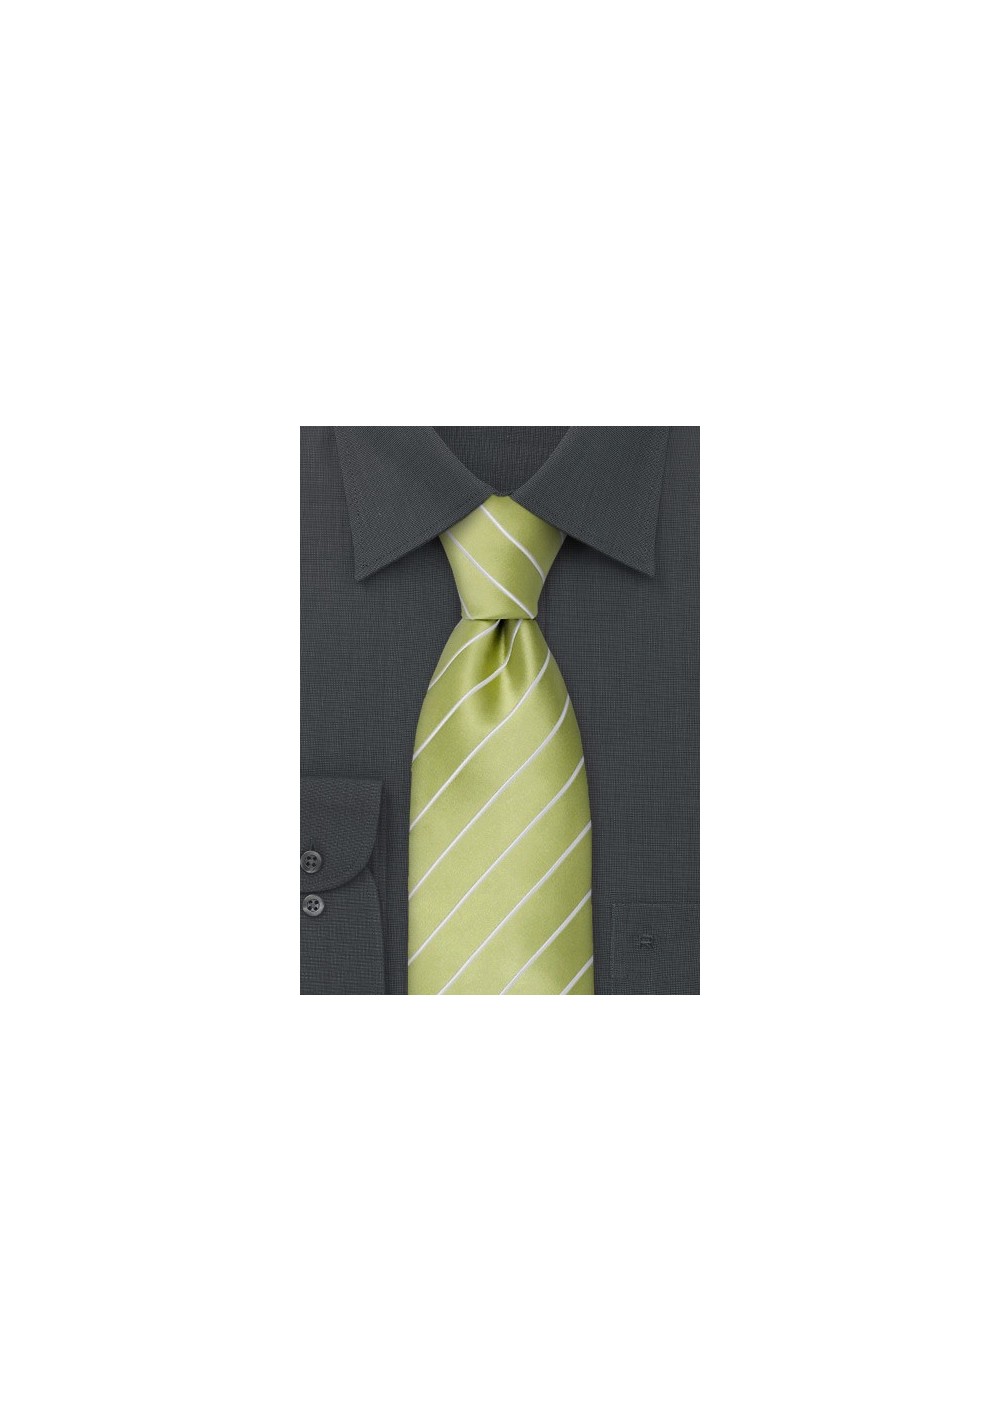 Lime Green Striped Tie in XL Length